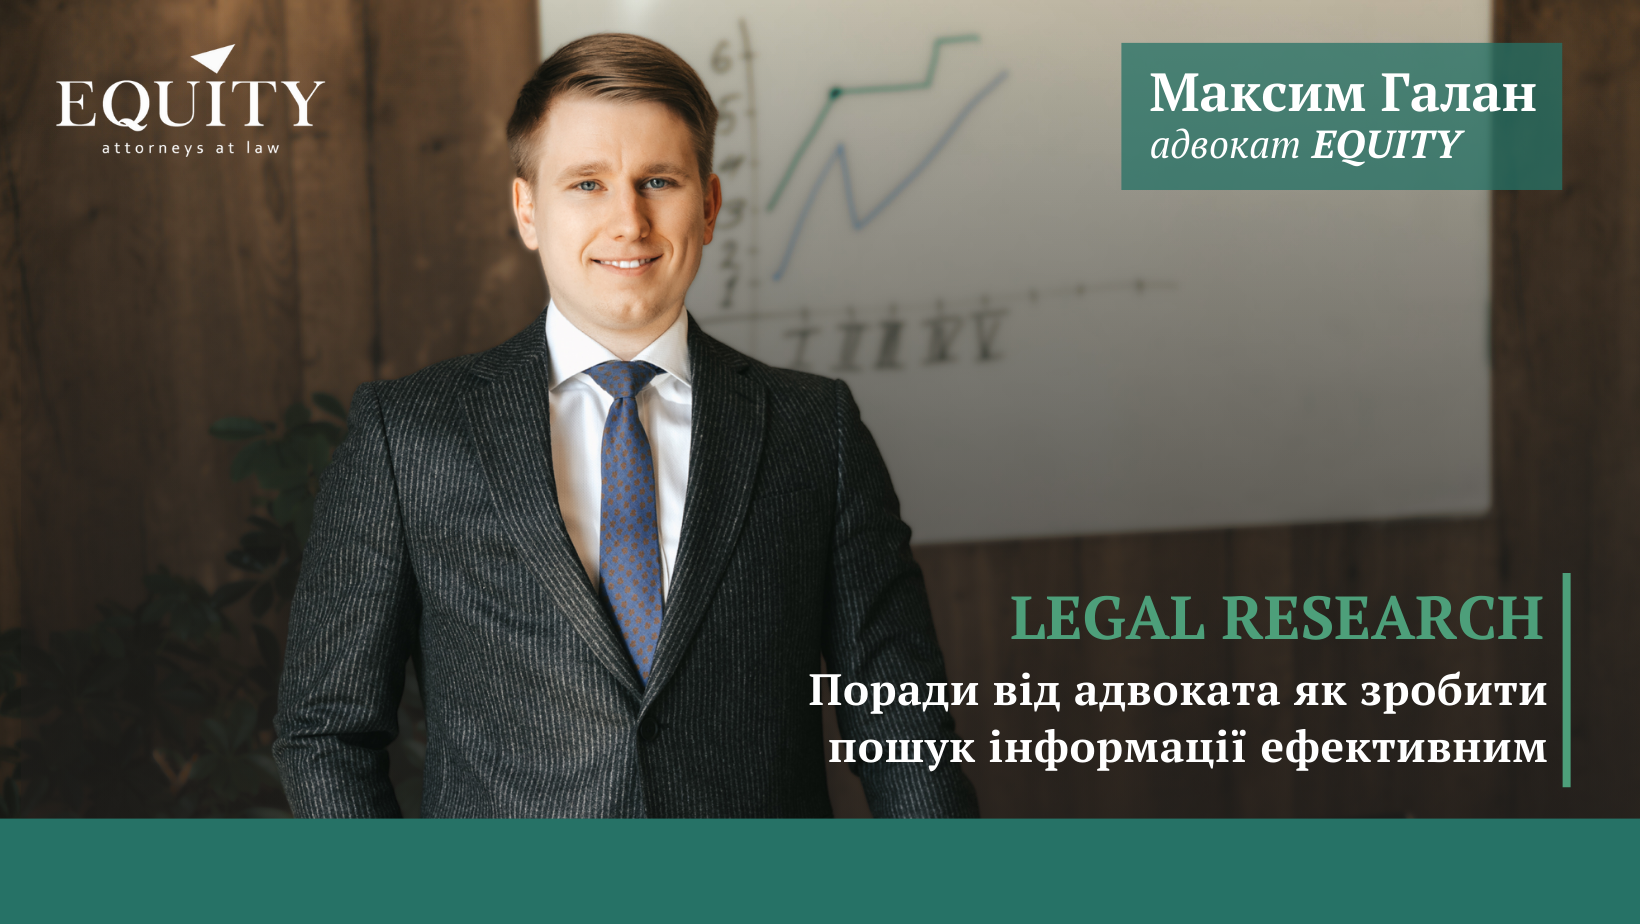 Maksym Halan gave a lecture for young lawyers at the Legal Career Day